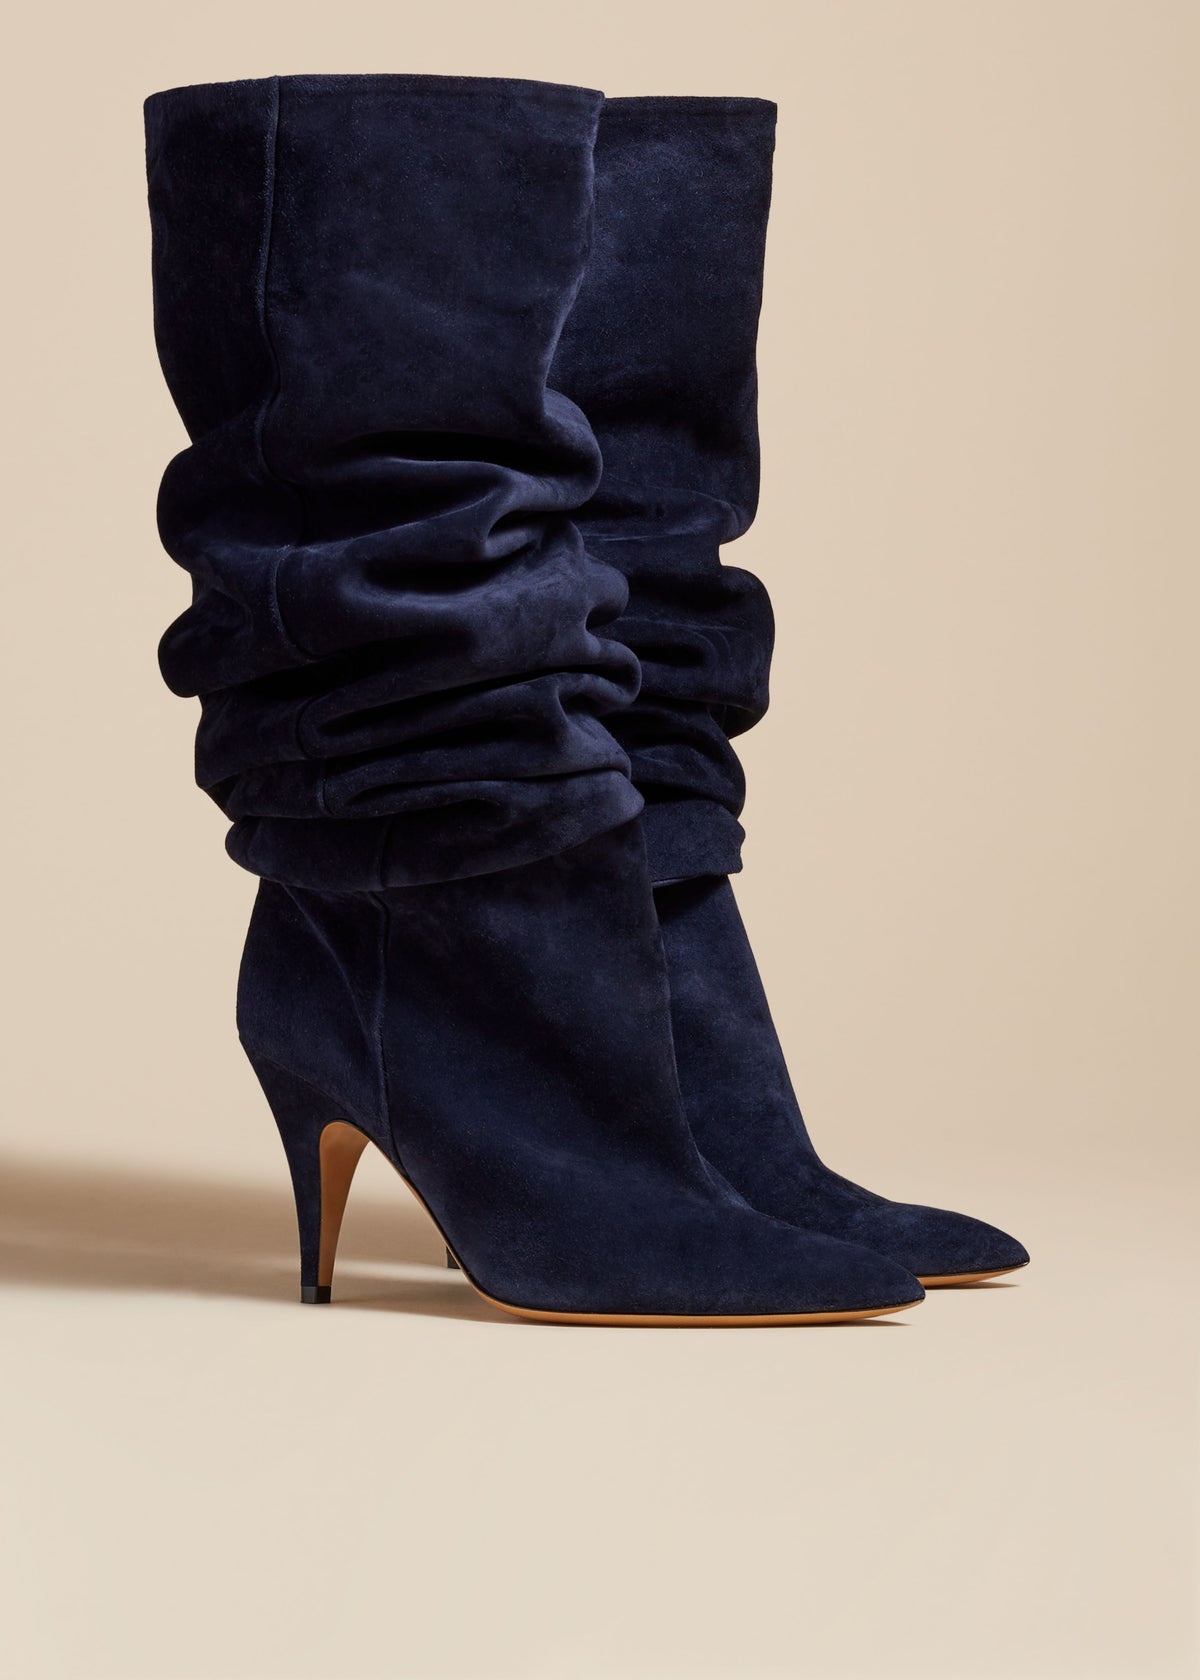 The River Knee-High Boot in Midnight Suede - 2